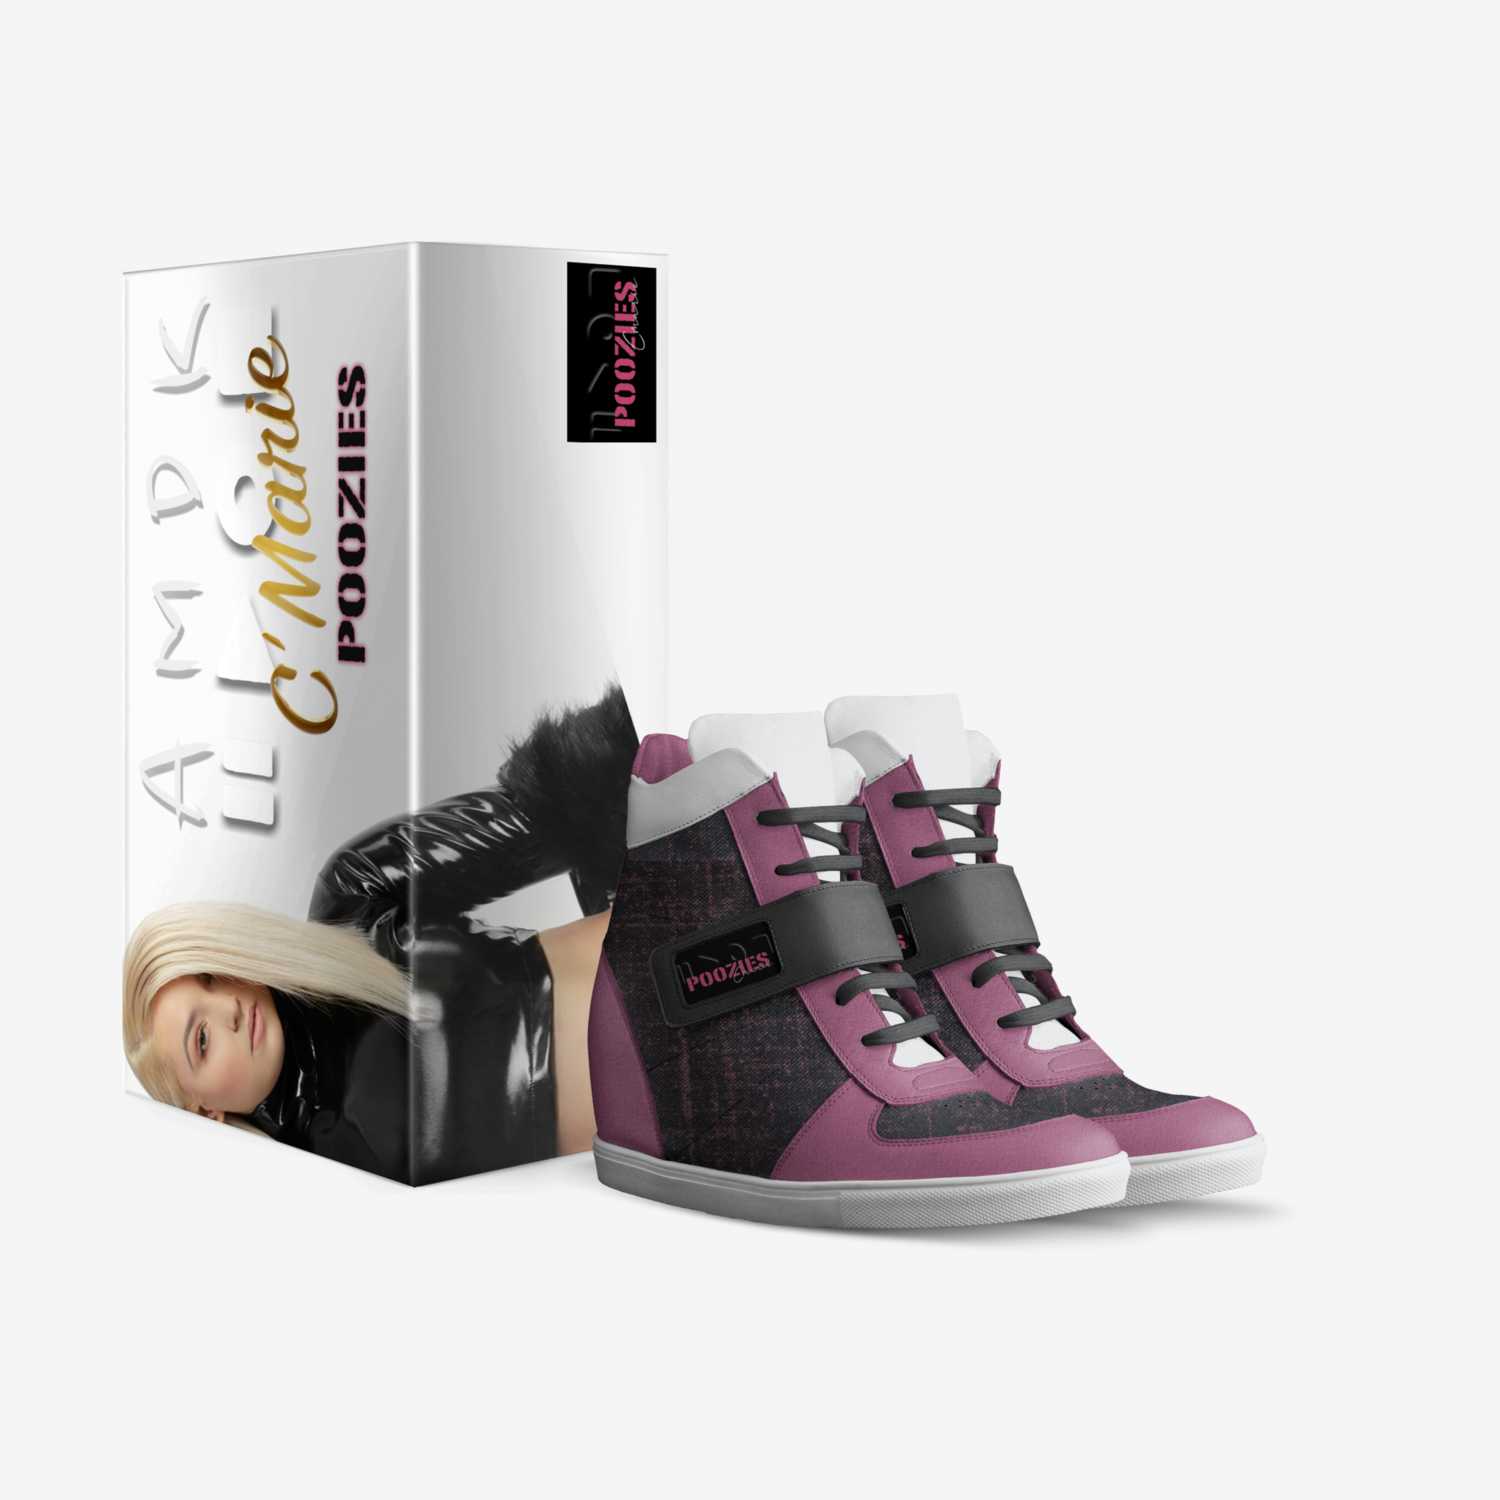 AMDK - CMARIE custom made in Italy shoes by Alexander Teamer | Box view